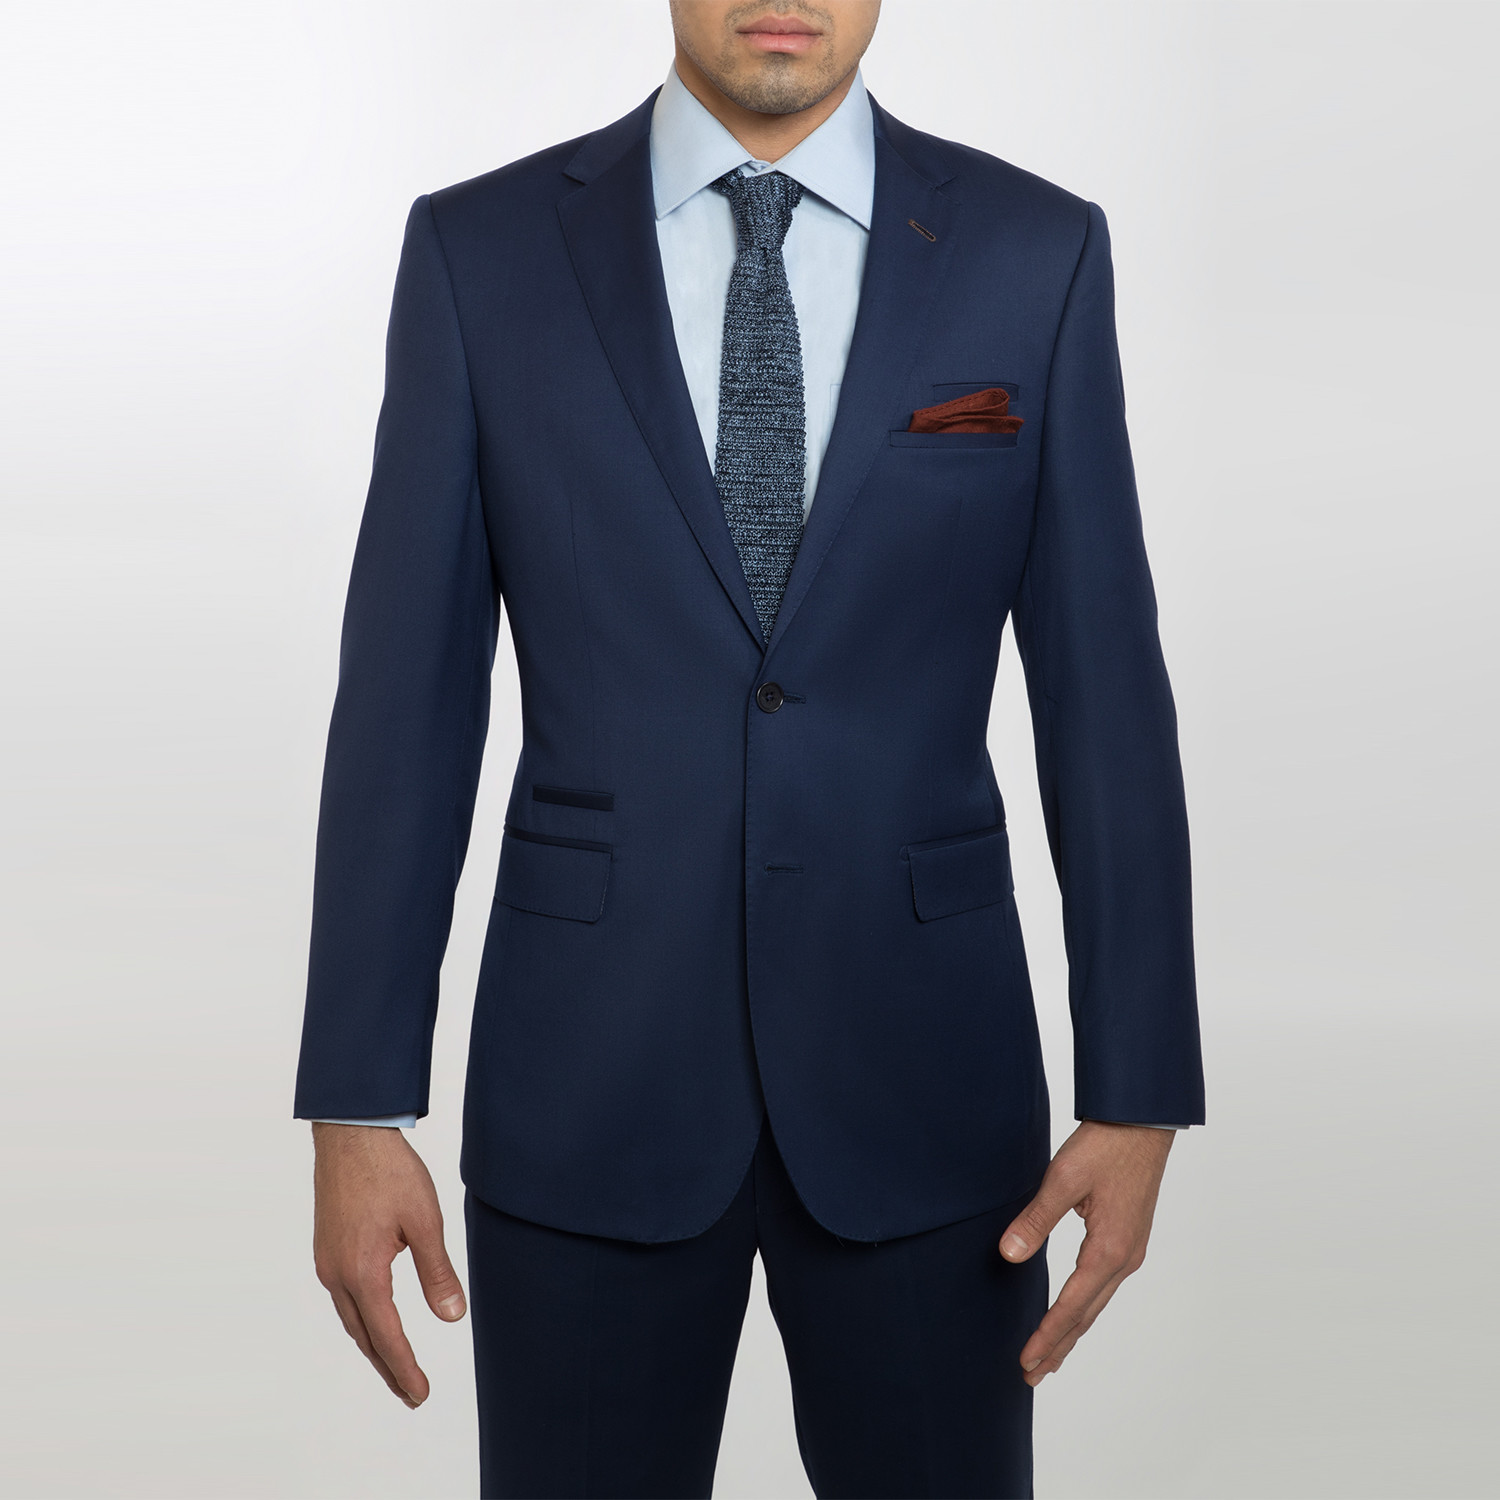 2BSV Notch Lapel Suit // French Blue (40L) - BMG Imports - Touch of Modern